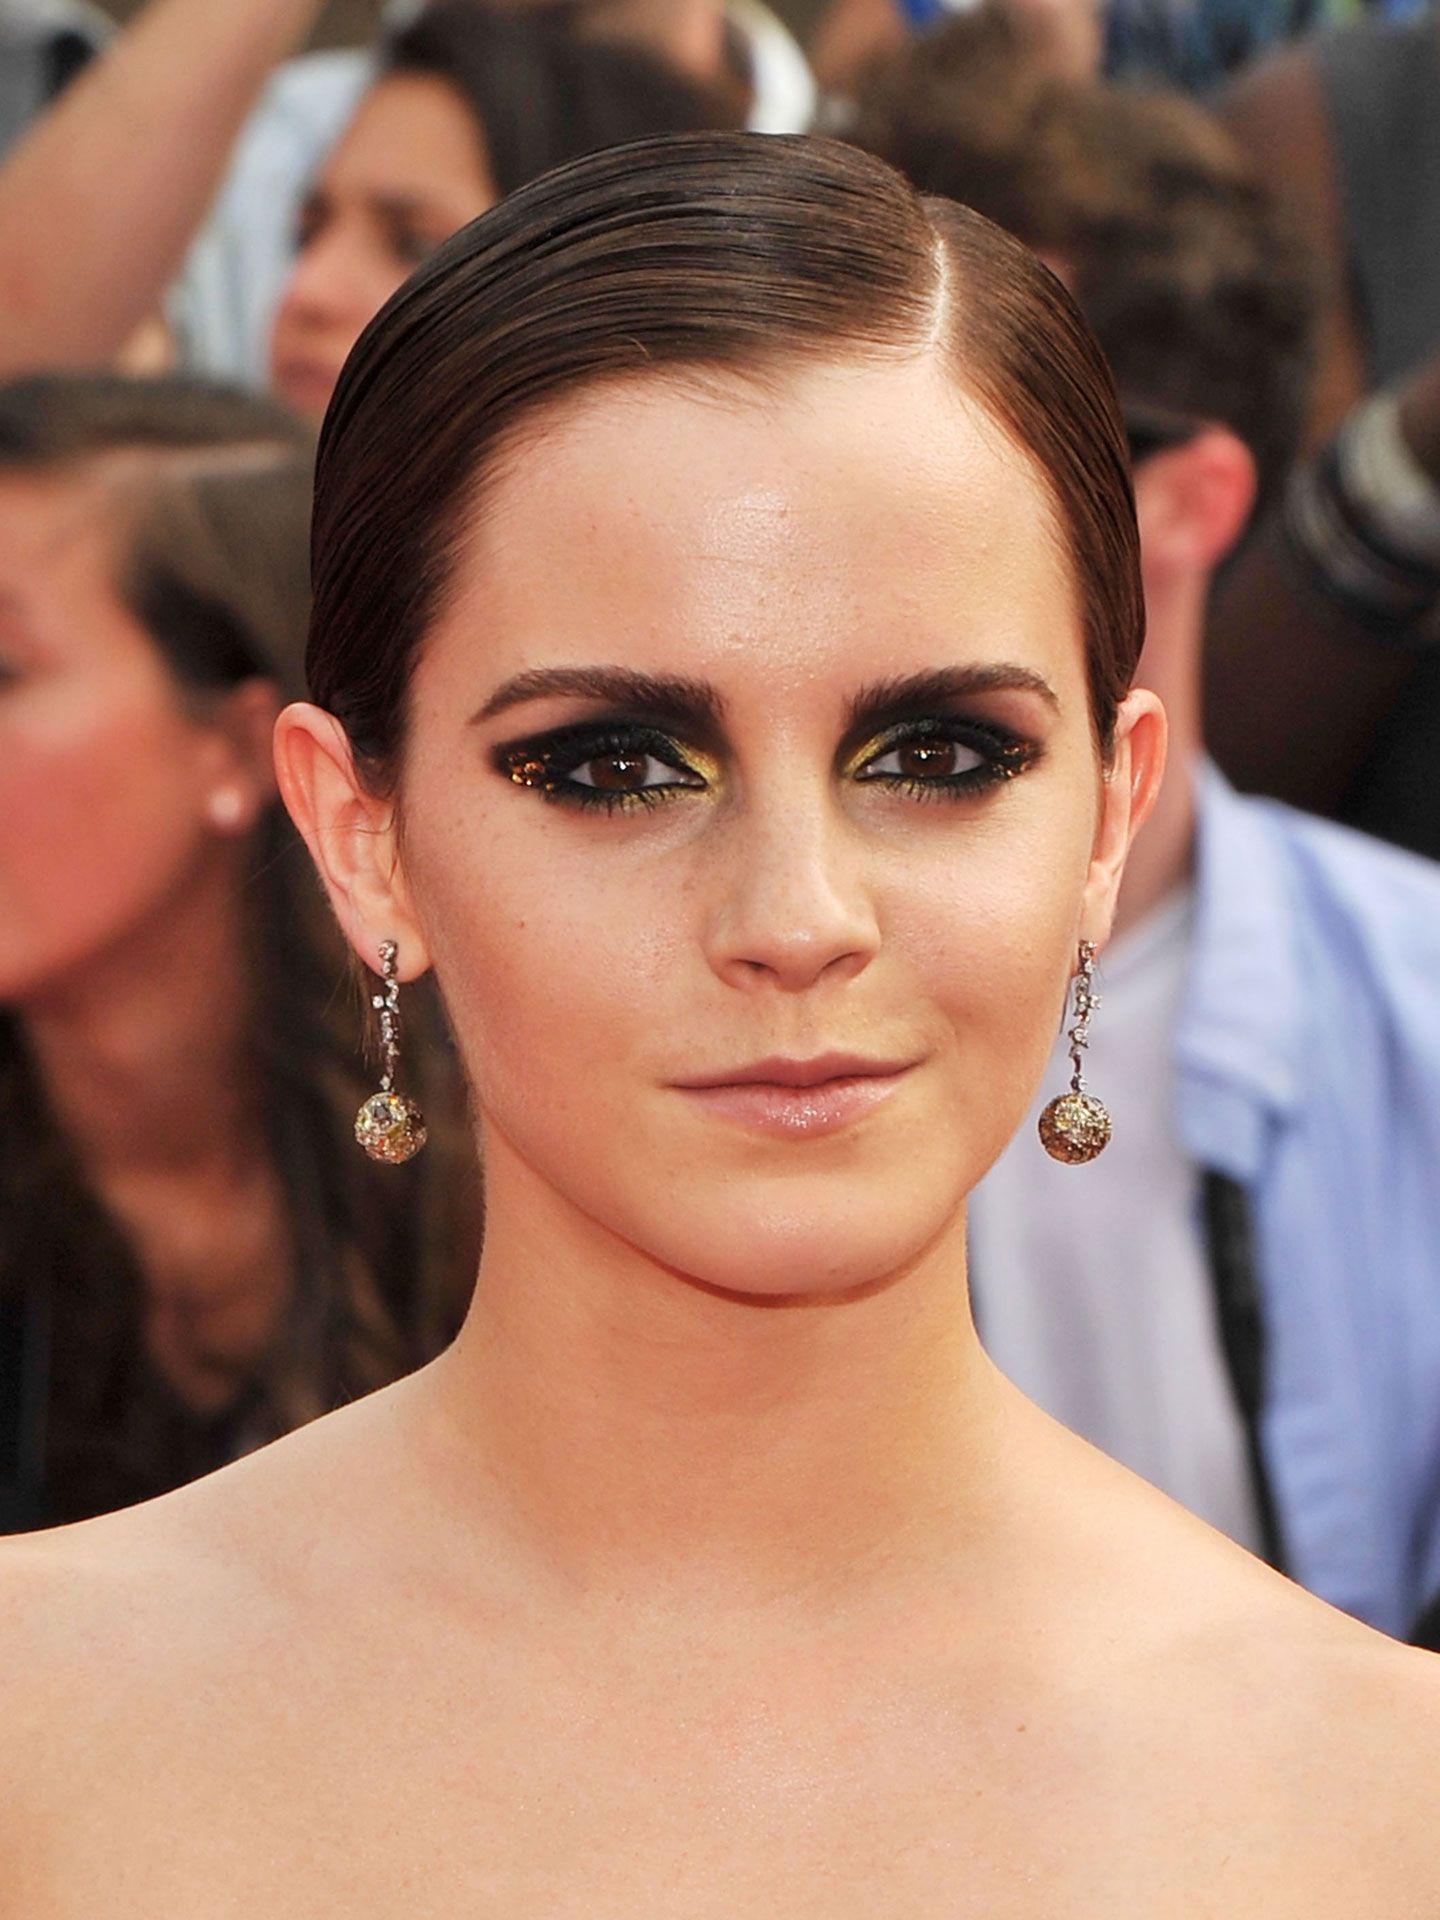 Emma Watson Hair And Makeup Pictures Of Emma Watson S Hair And Makeup Looks